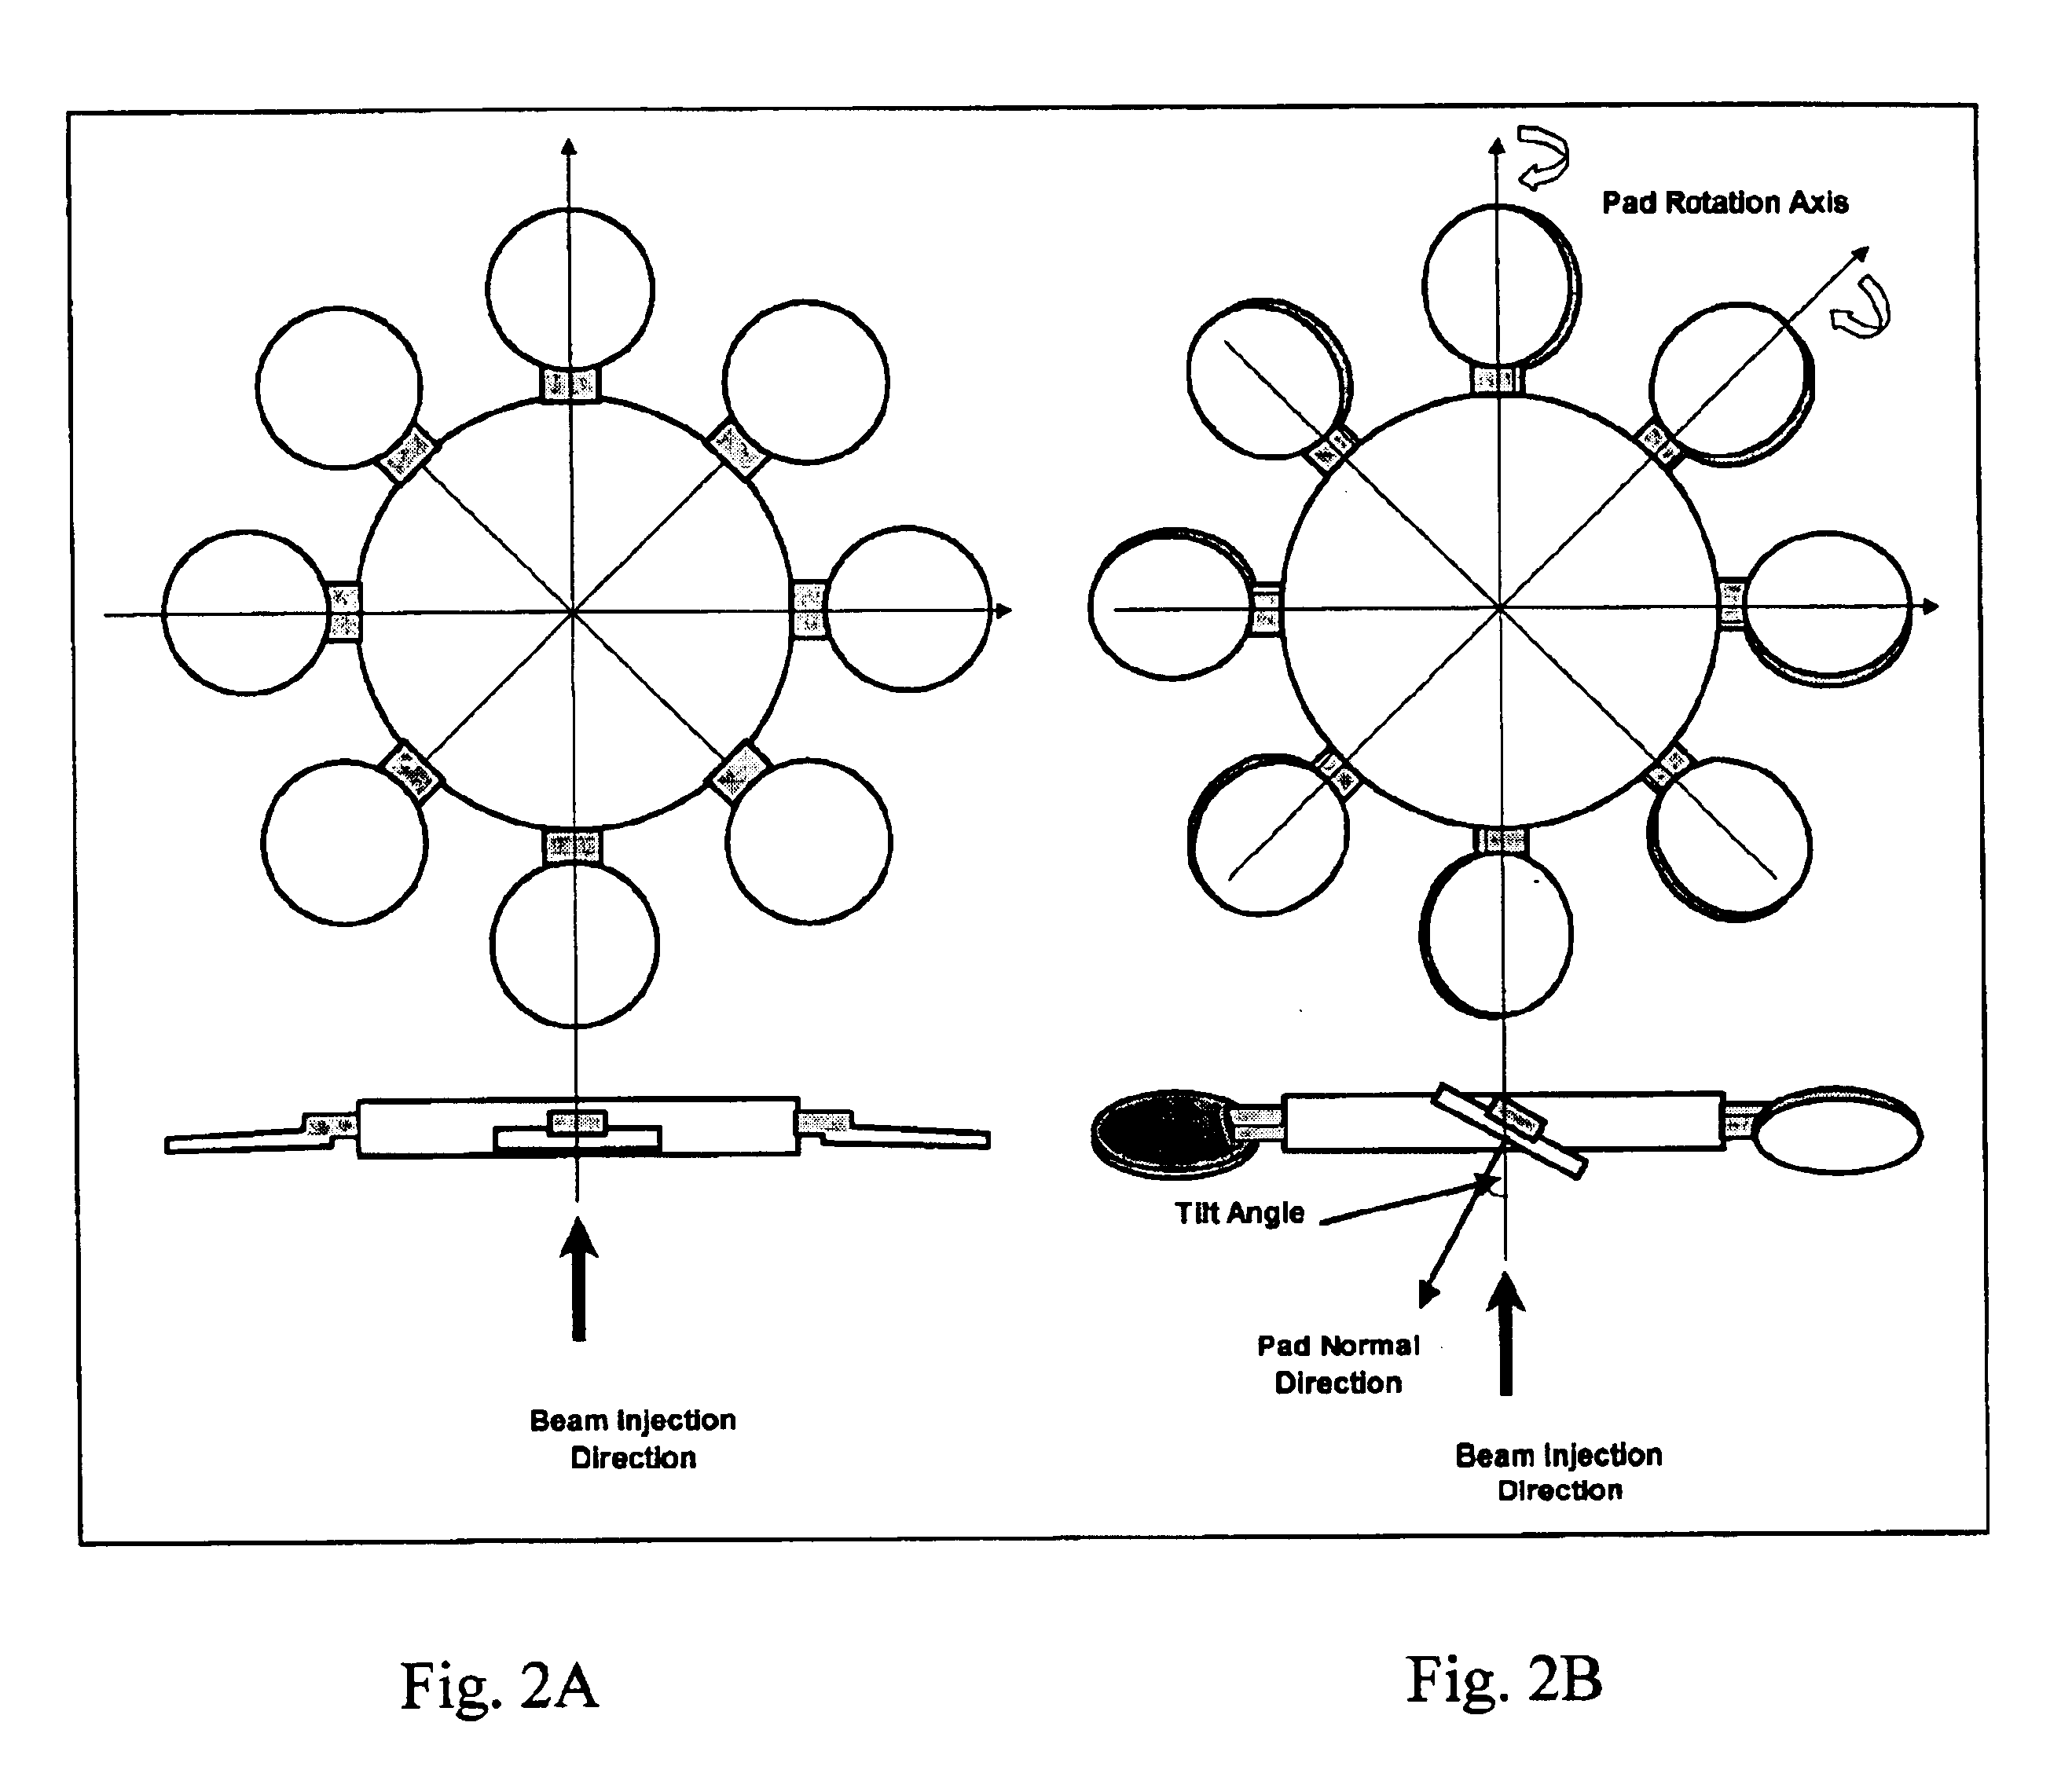 Apparatus and method for reducing implant angle variations across a large wafer for a batch disk